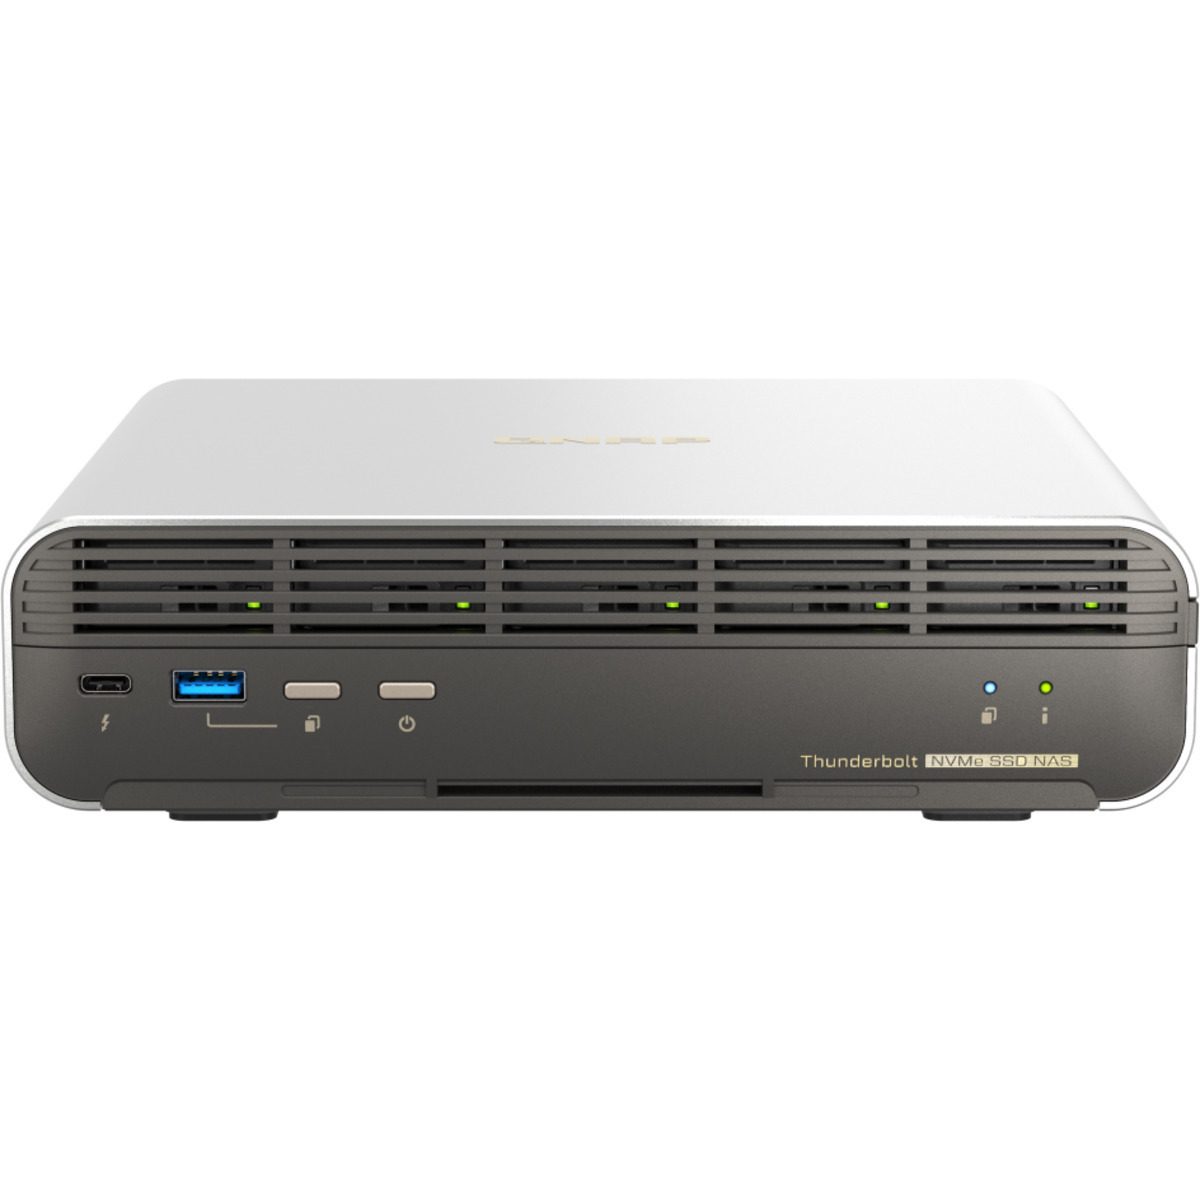 QNAP TBS-h574TX Core i3 Thunderbolt 4 3tb 5-Bay Desktop Multimedia / Power User / Business DAS-NAS - Combo Direct + Network Storage Device 3x1tb Sandisk Plus Series SDSSDA3N-1T00  3200/2500MB/s M.2 2280 NVMe SSD CONSUMER Class Drives Installed - Burn-In Tested TBS-h574TX Core i3 Thunderbolt 4